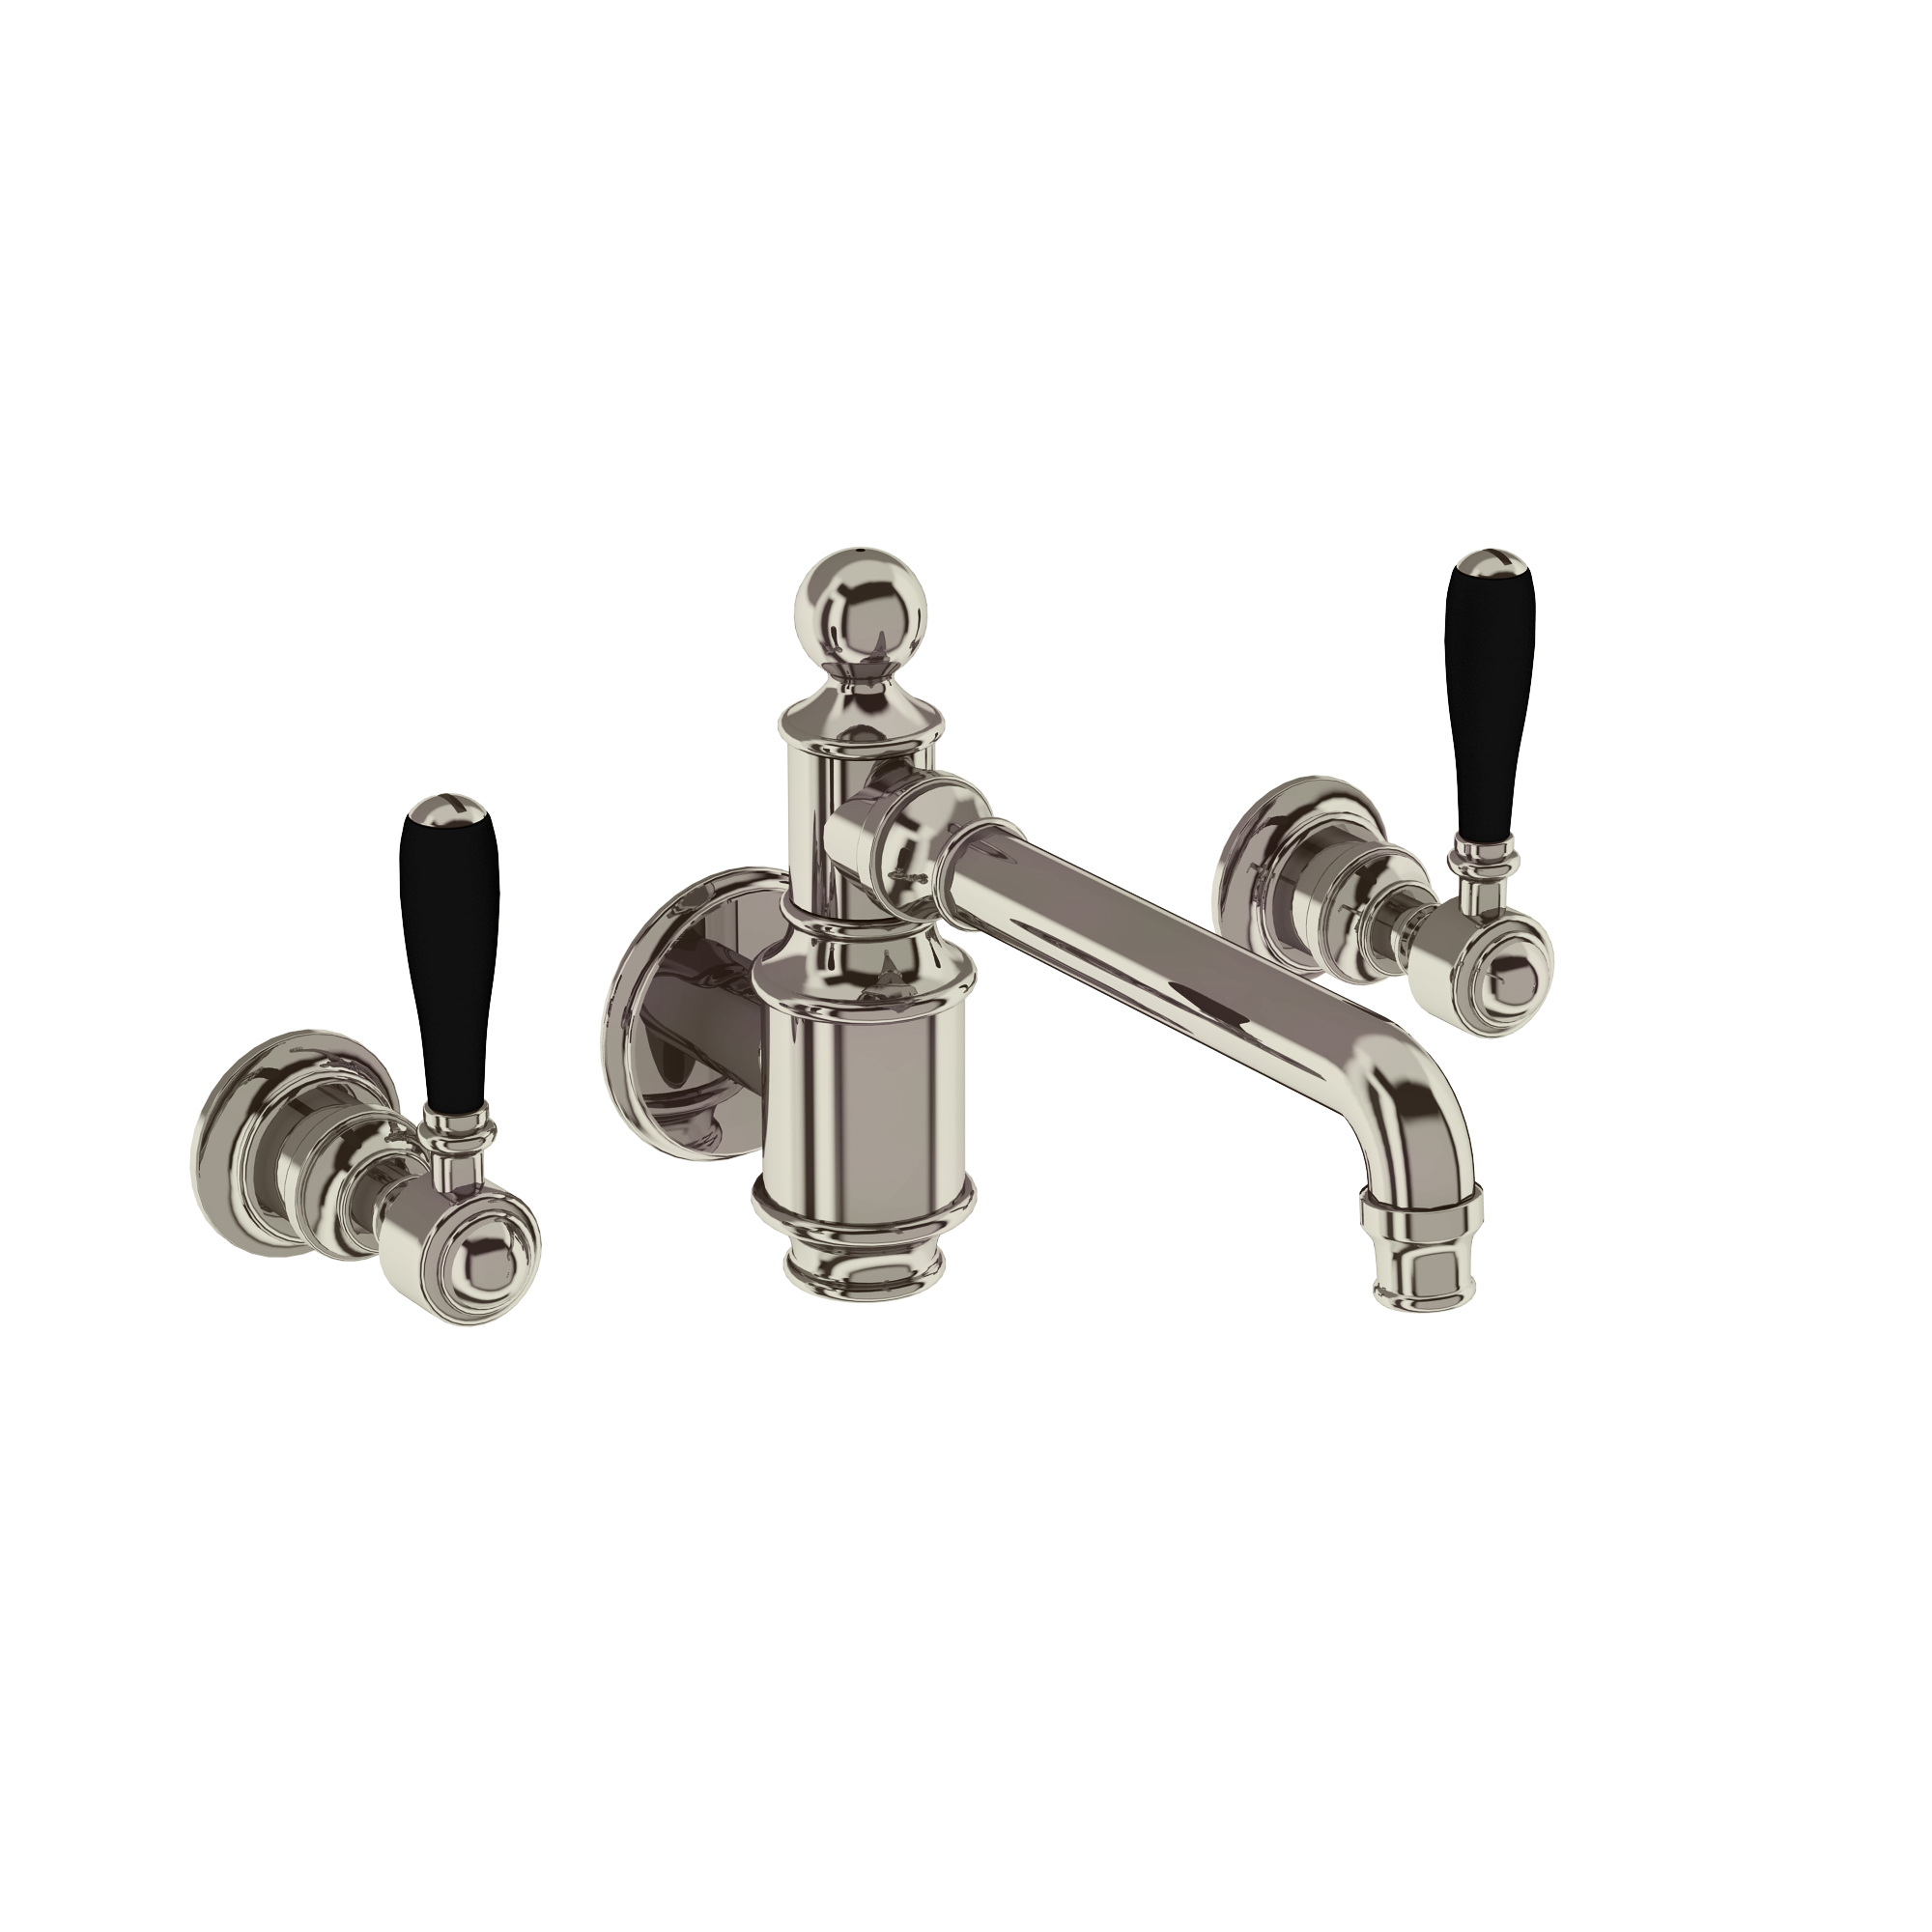 Arcade Three hole basin mixer wall-mounted without pop up waste - nickel - with black lever